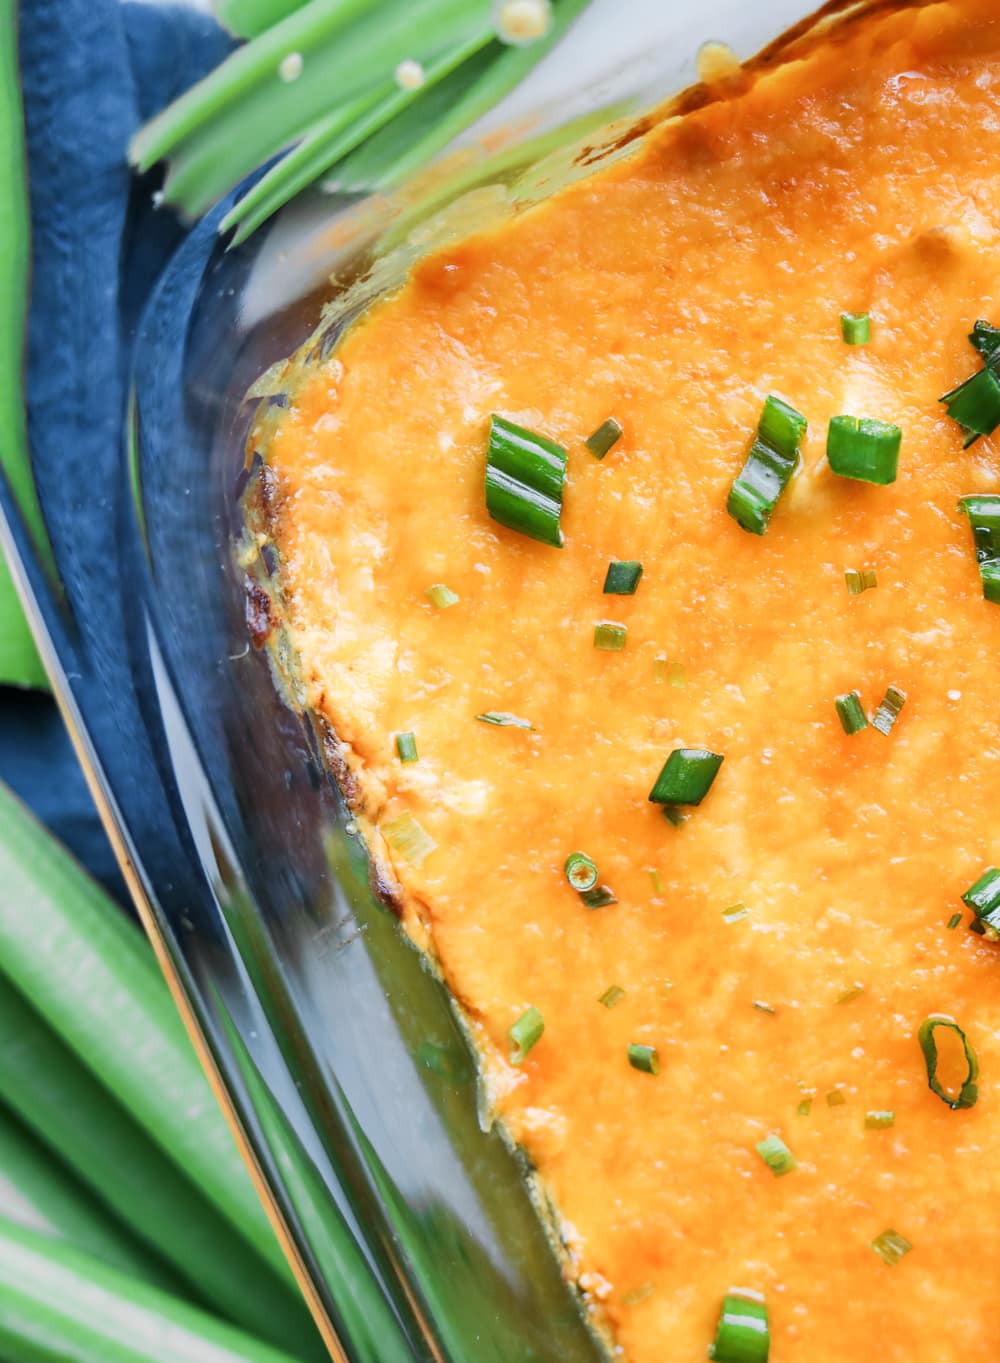 Keto Buffalo chicken wing dip topped with chives.